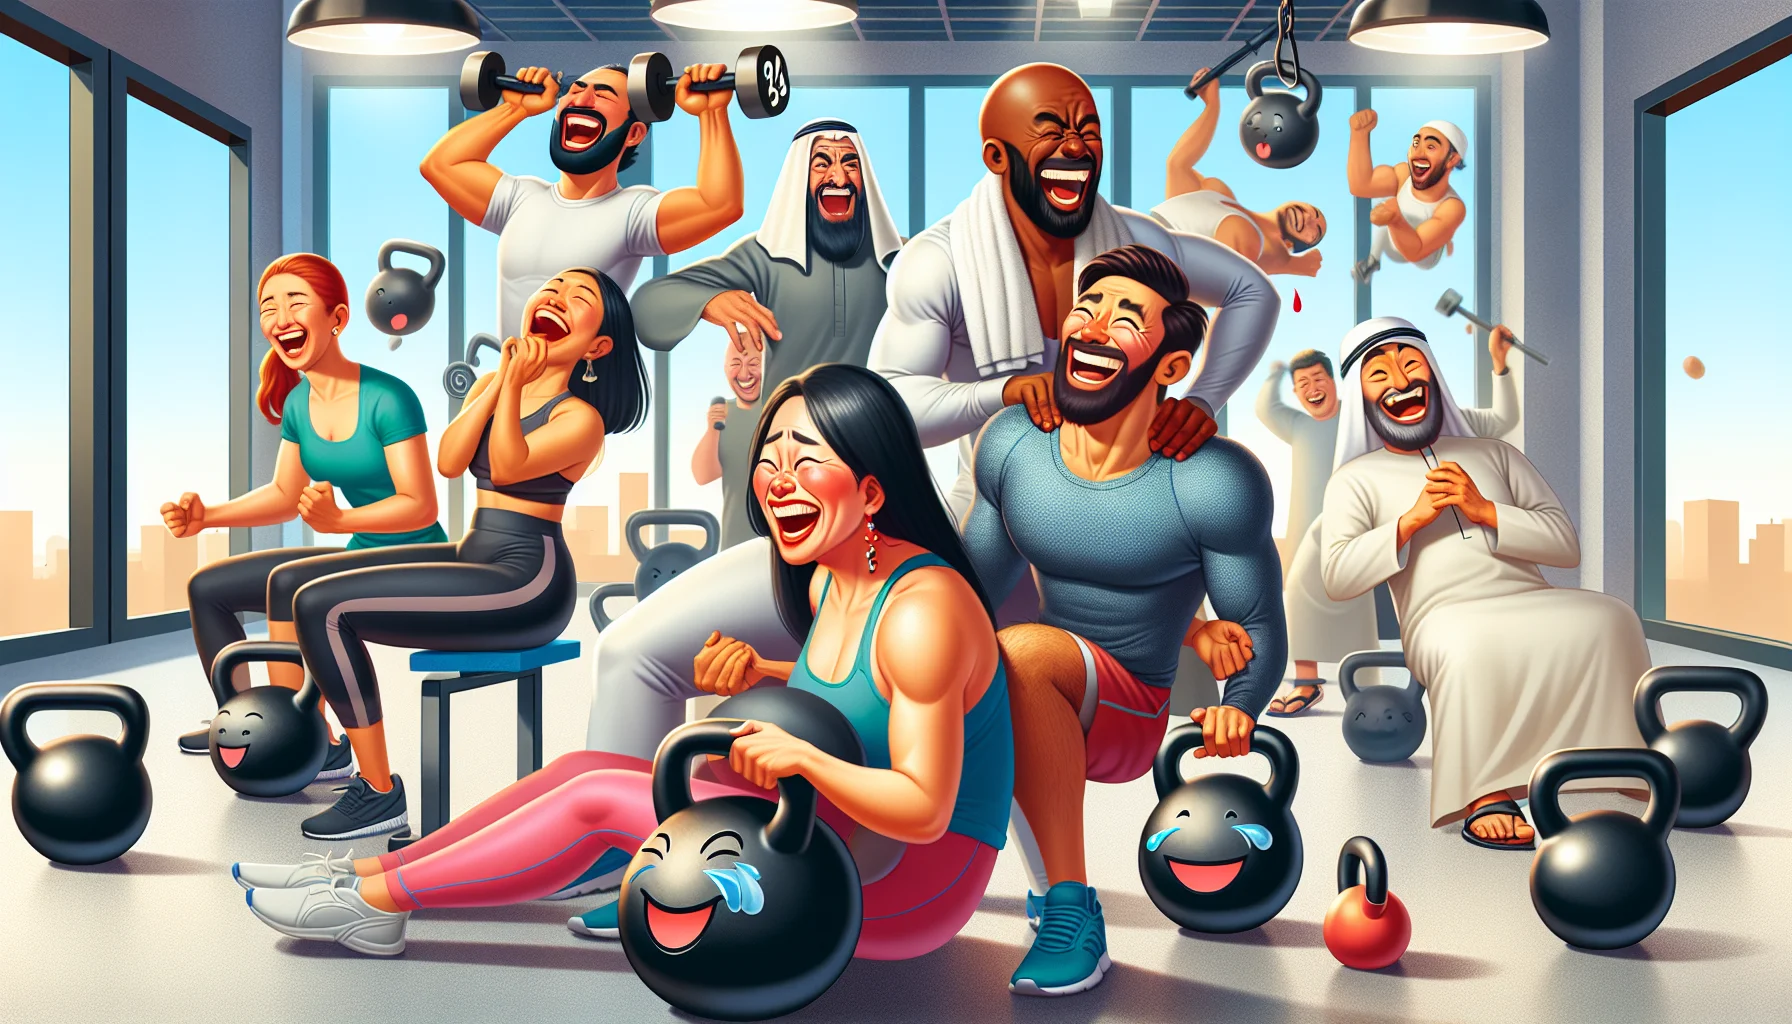 A comical scene of an indoor gym, where people of different descents and genders are performing seated kettlebell exercises with an enthusiastic spirit. A South Asian woman and a Caucasian man are laughing together as they each struggle to lift an oversized kettlebell, their faces red with hilarity and effort. A Middle-Eastern man in the background is attempting to balance a kettlebell on his head, causing everyone around him to laugh. There are also animated kettlebells floating in the background with smiling faces to inject more humor into the scene. The atmosphere is joyous, promoting the fun side of exercising.